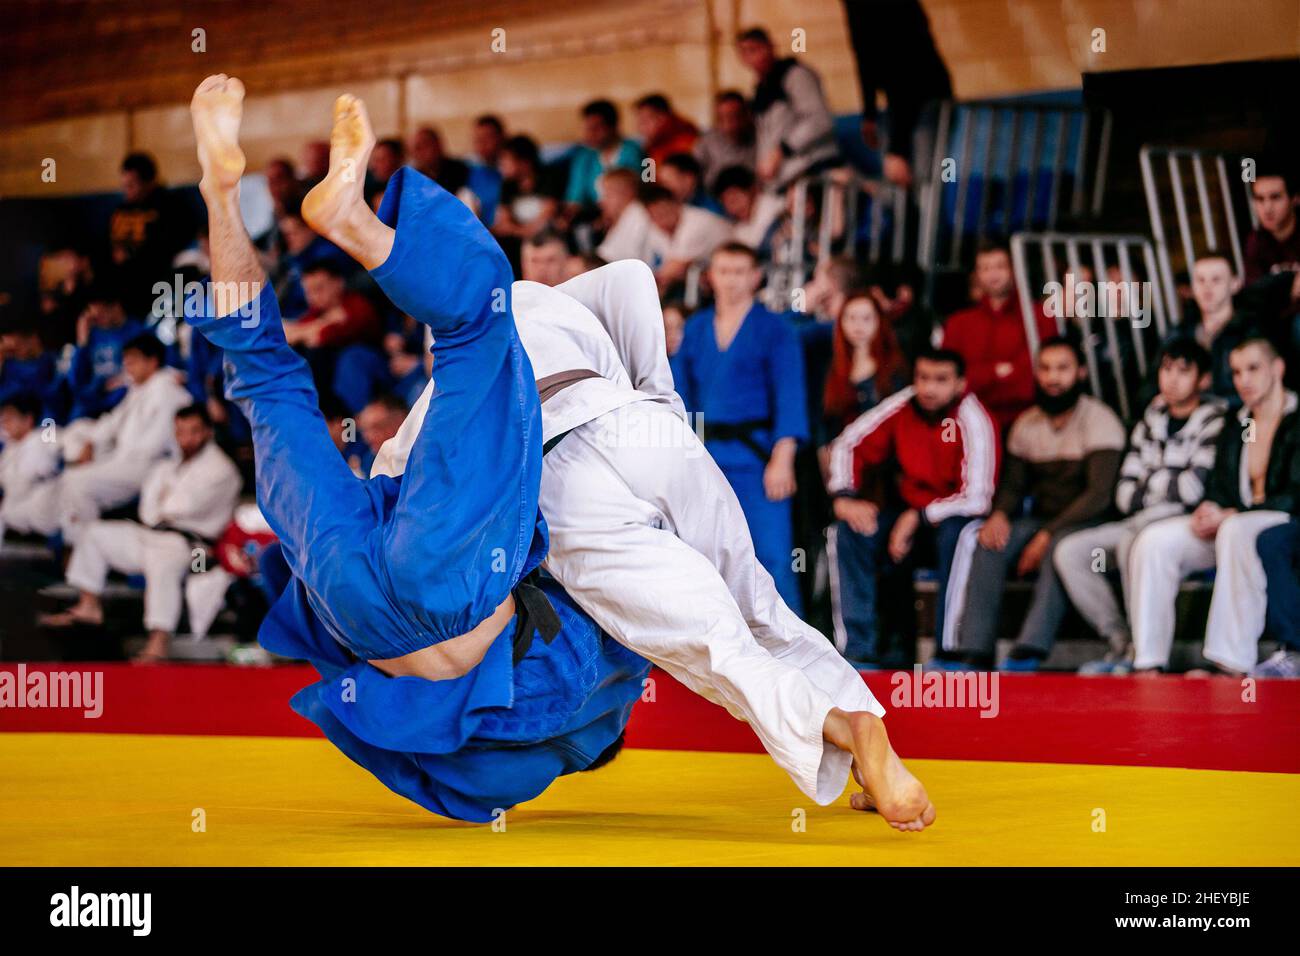 judo fighter is thrown for an ippon in judo competition Stock Photo